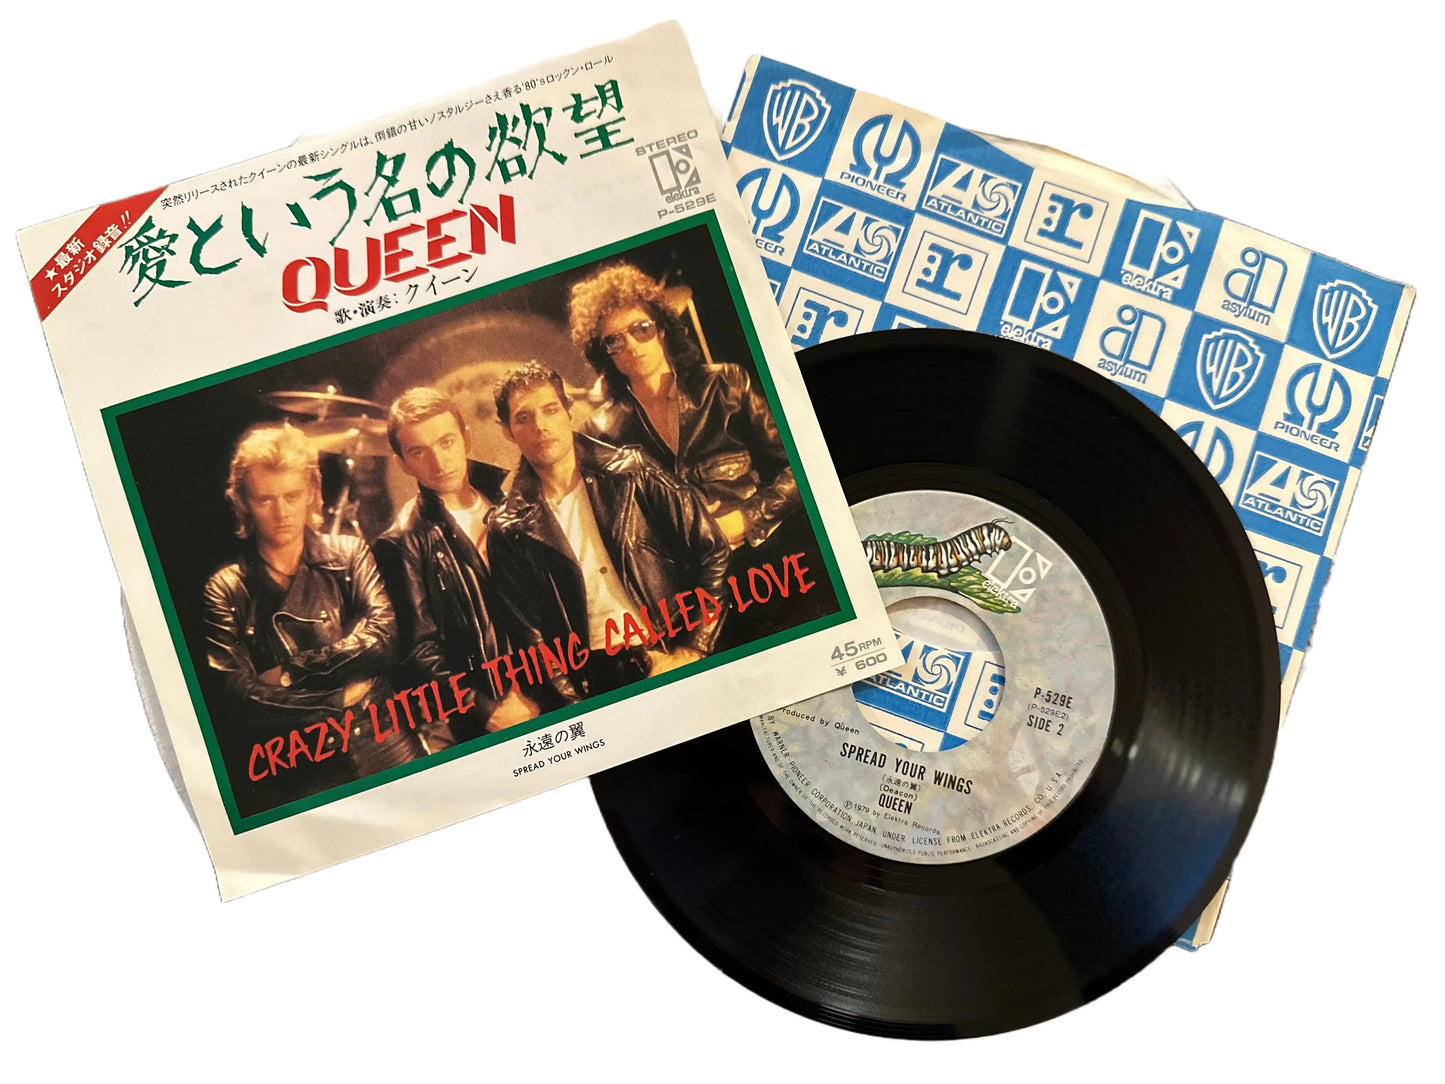 Queen - Crazy Little Thing Called Love [Japanese 45 7" Vinyl Single]